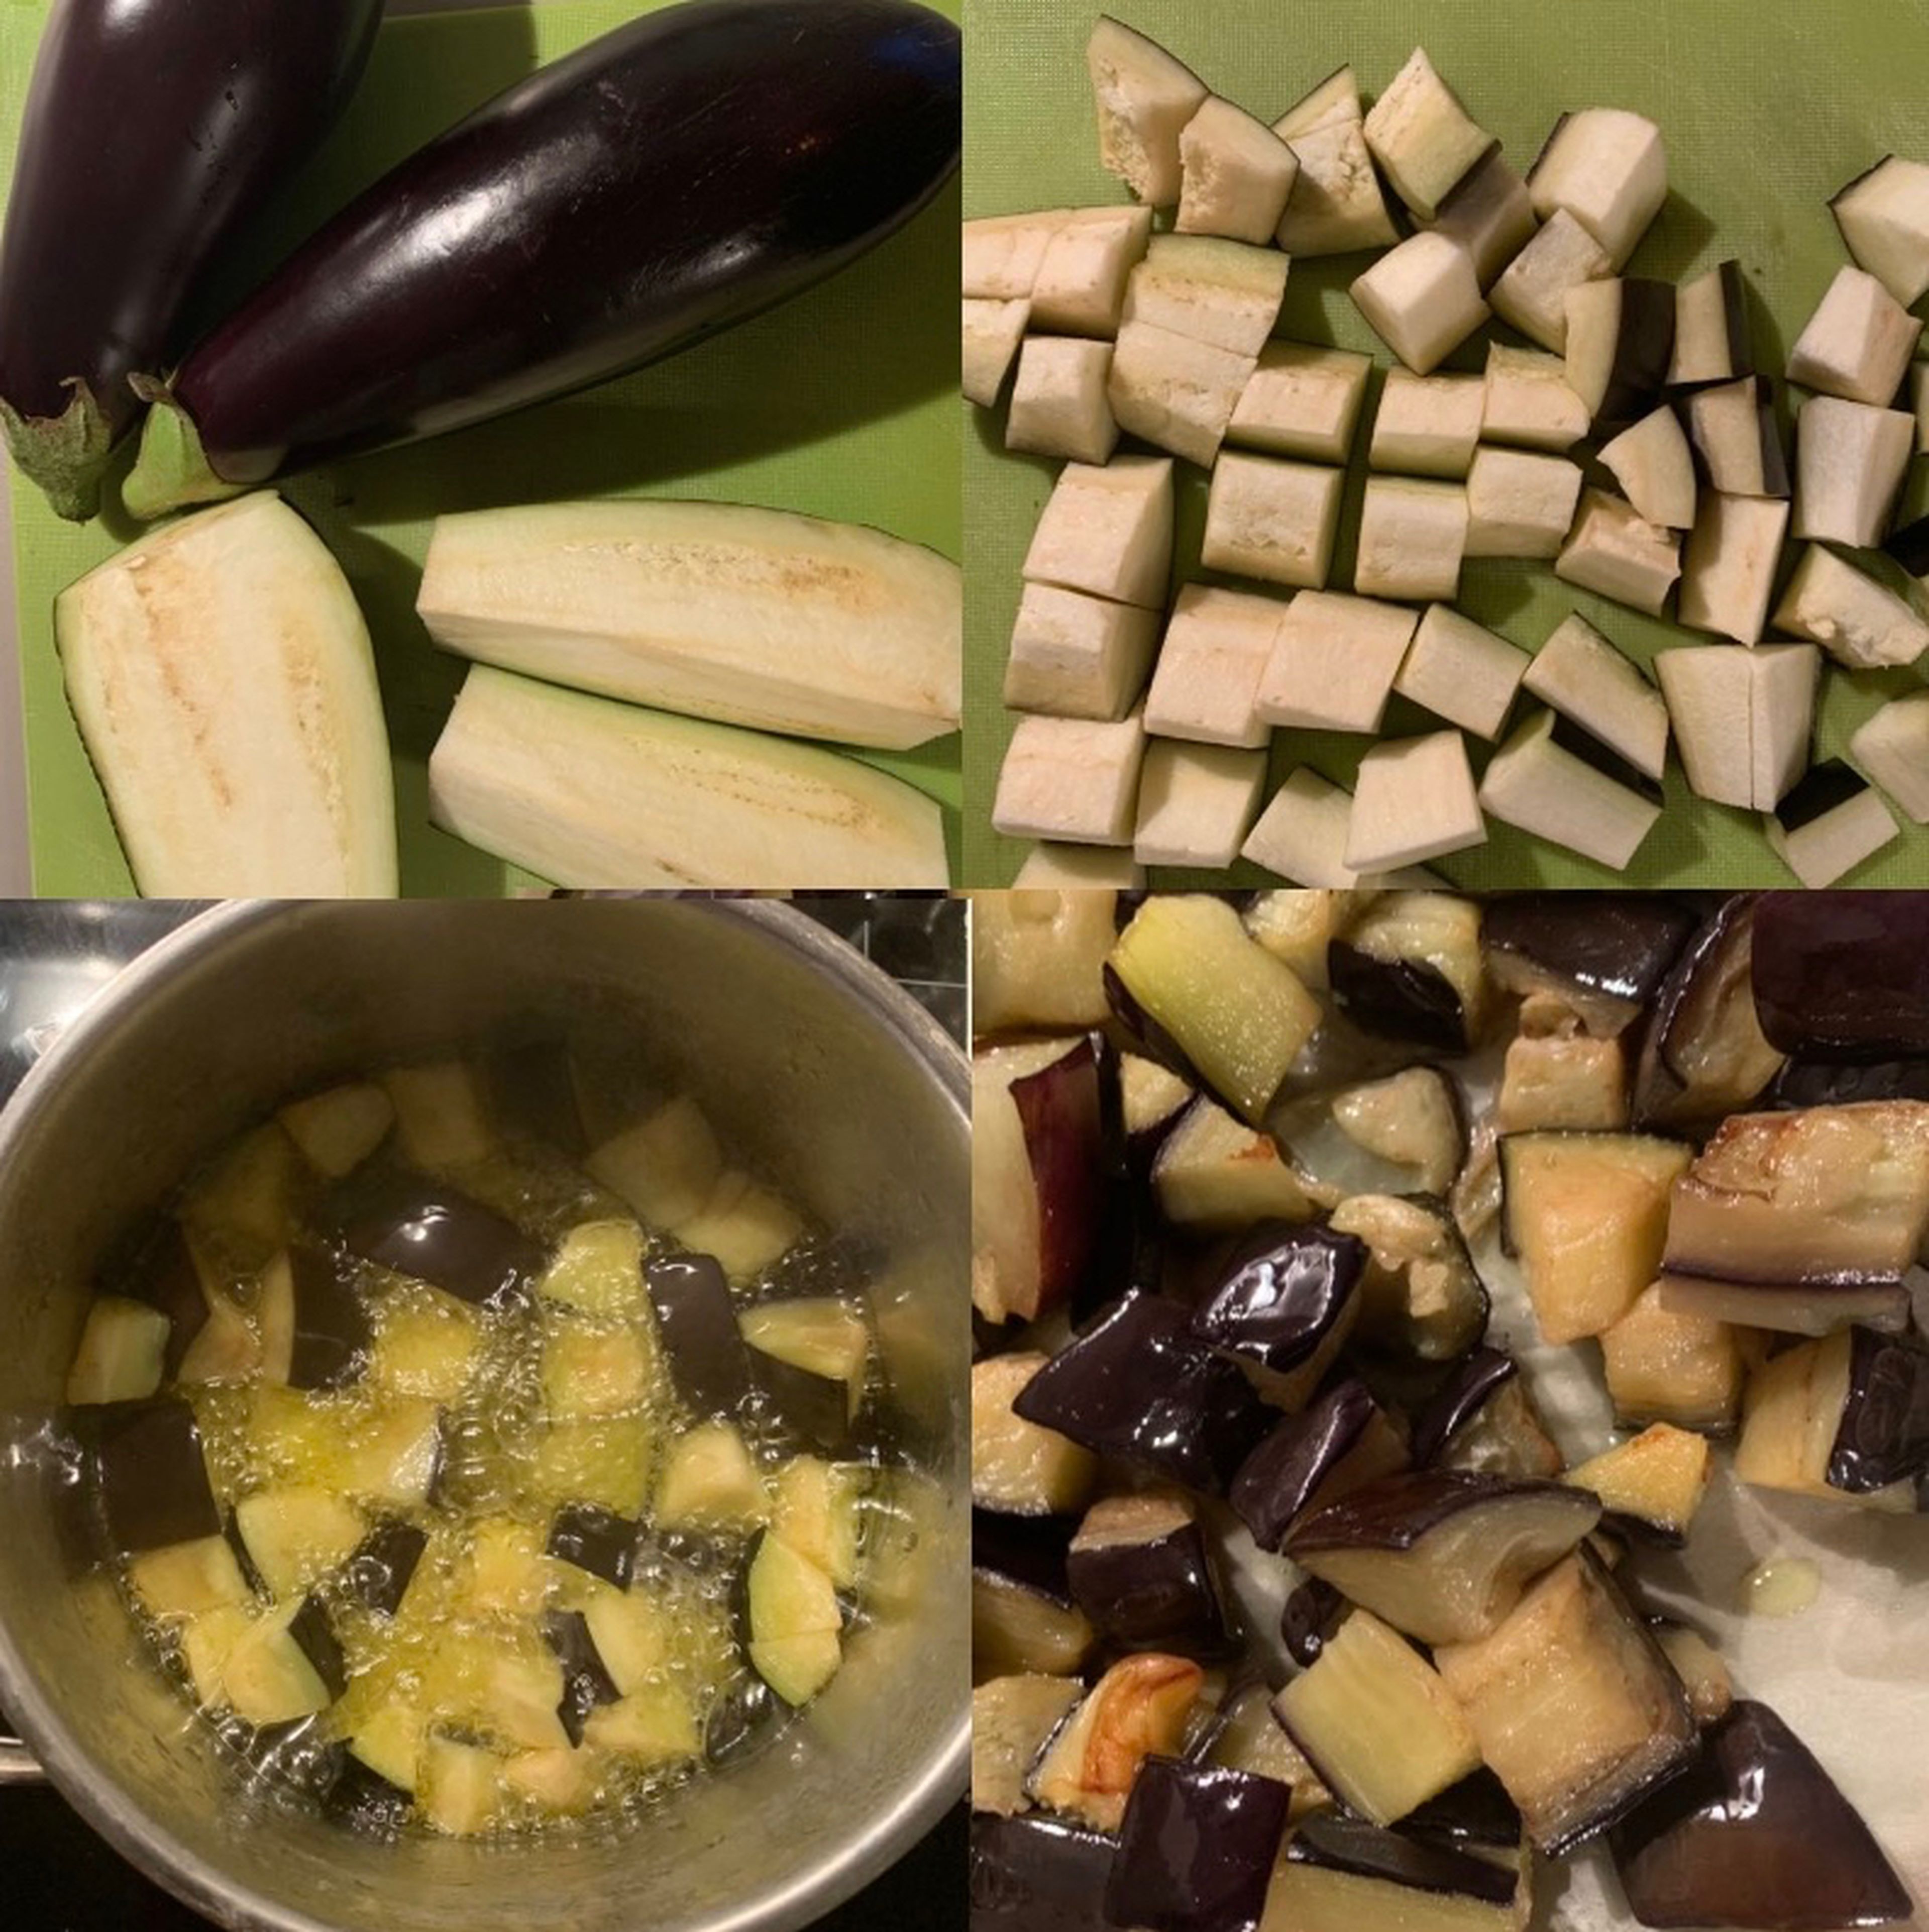 Wash and cut the eggplants into small pieces. Add a good amount of olive oil into a pot. When the oil is hot, add the eggplants in small doses. Deep fry them for 4/5 minutes until golden. Drain the fried eggplants and place them over a plate covered with baking paper to assorbe the oil in excess.